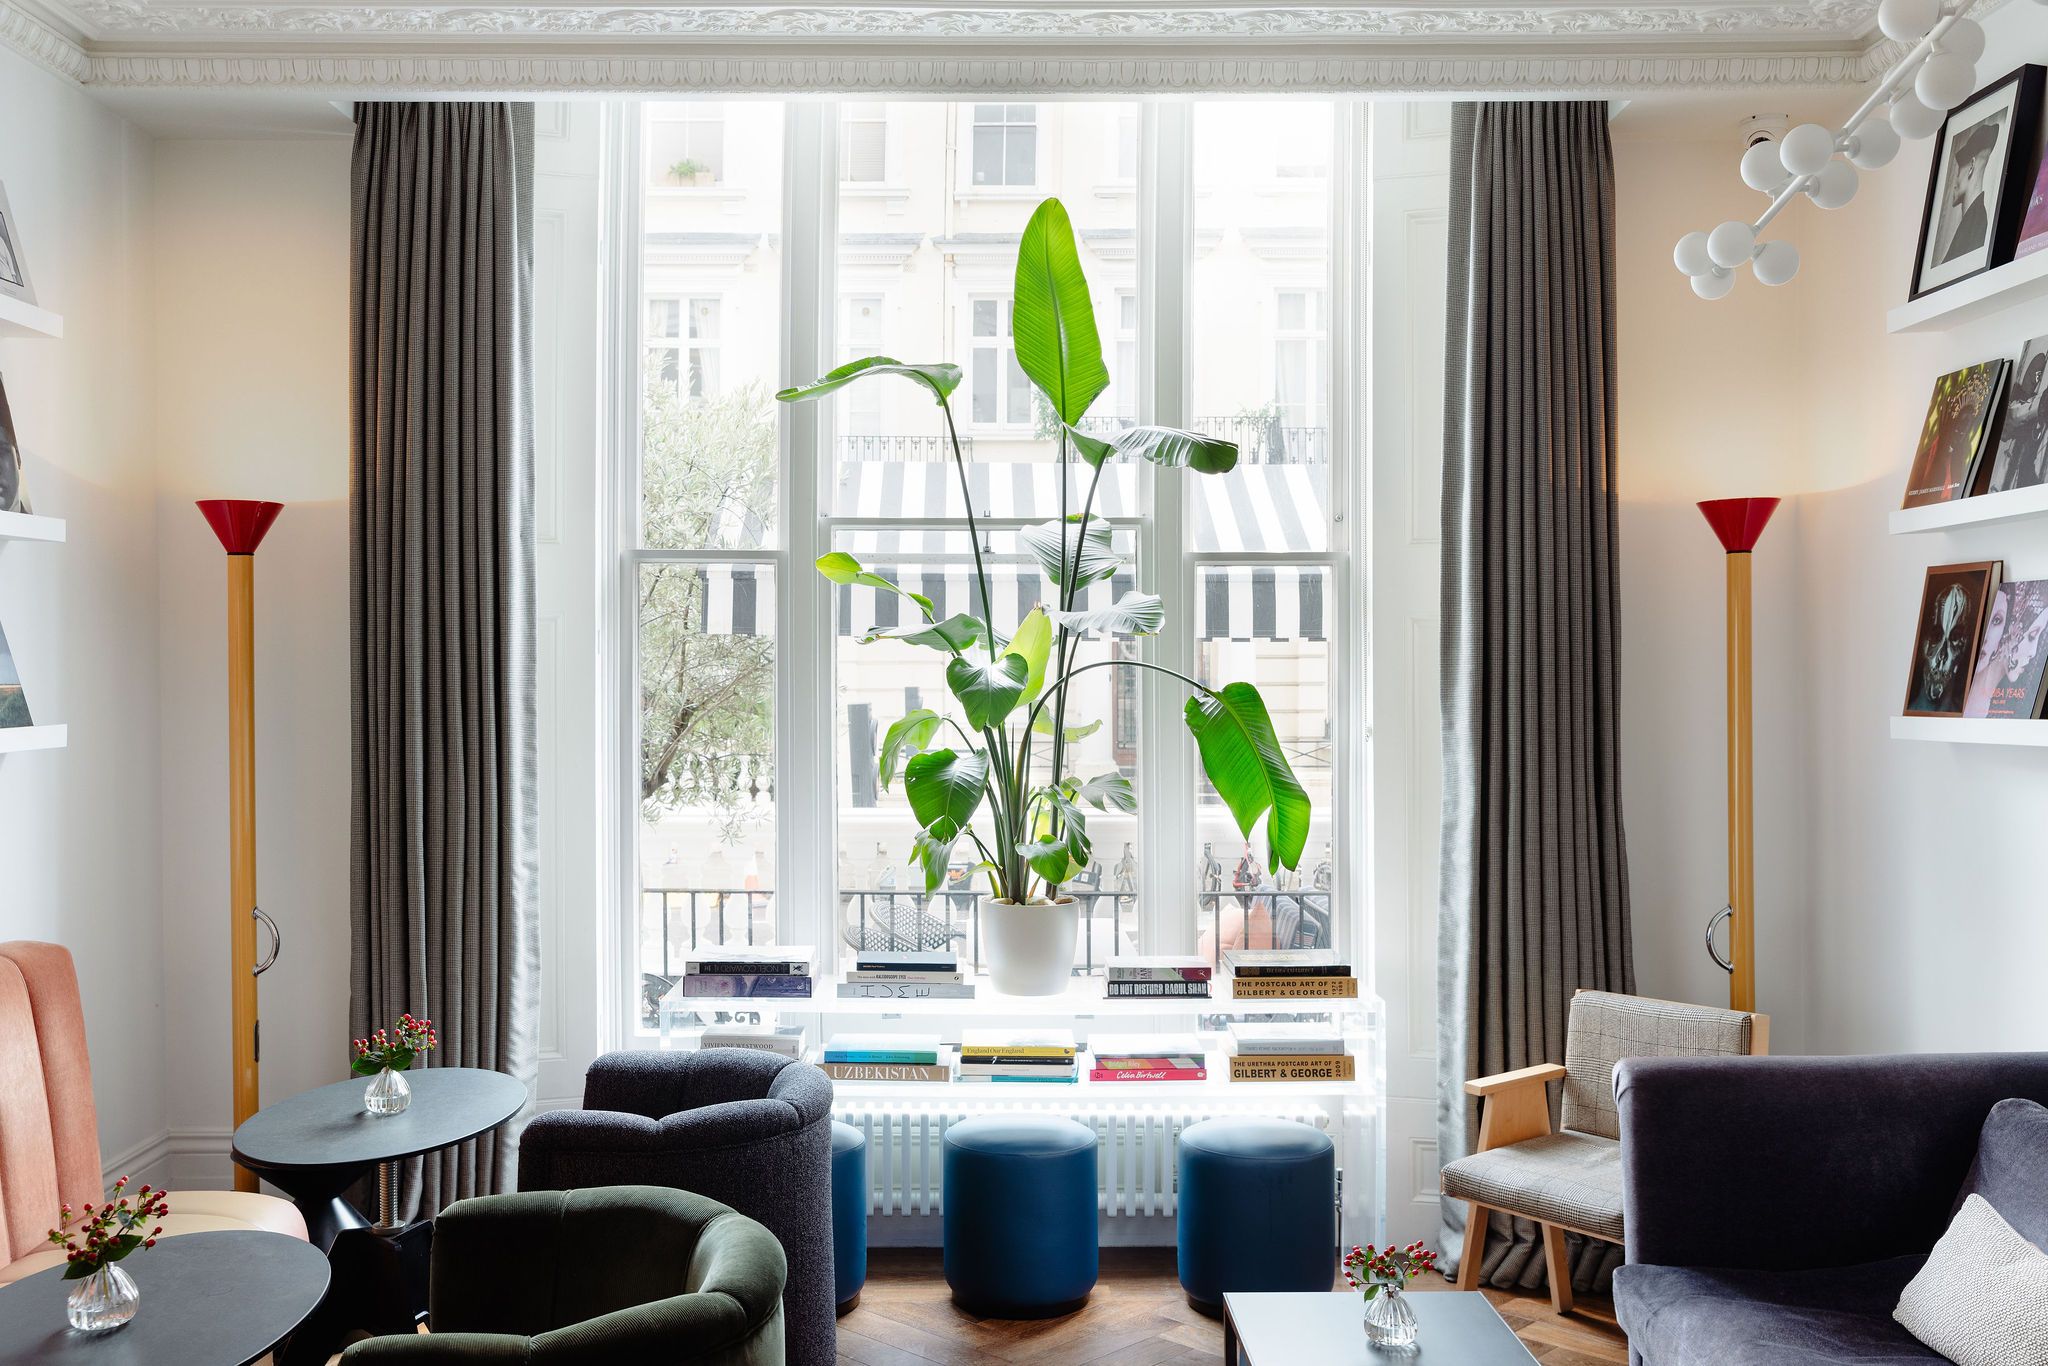 <p>The capital may have hundreds of eye-wateringly <a href="https://www.elle.com/uk/life-and-culture/travel/g23050000/the-best-luxury-london-hotels/">expensive hotels</a>, but there are also lots of budget hotels in London – and luckily these days that doesn’t have to mean scrimping on style.</p><p>Bargain rates <em>and </em>stylish design? We kid you not. Take Shoreditch’s <a href="https://www.booking.com/hotel/gb/mama-shelter-london.en-gb.html?aid=2200764&label=budget-hotels-london-intro">Mama Shelter</a>, which brings laid-back Parisian vibes to London’s coolest corner. Or your favourite local, <a href="https://www.booking.com/hotel/gb/princess-royal.en-gb.html?aid=2200764&label=budget-hotels-london-intro">The Princess Royal</a> in Notting Hill, with a menu so good, you won’t know where to start. </p><p>While you’re in town, you’ll want to see the sights – for a central setting, try <a href="https://www.booking.com/hotel/gb/royal-norfolk.en-gb.html?aid=2200764&label=budget-hotels-london-intro">The Pilgrm</a> in Paddington or <a href="https://www.booking.com/hotel/gb/z-covent-garden.en-gb.html?aid=2200764&label=budget-hotels-london-intro">Z Hotel Covent Garden</a>. </p><p>All of these budget hotels in London have great locations, whether you’re coming to town to see the iconic landmarks or are in search of the more creative quarters, like <a href="https://www.elle.com/uk/life-and-culture/culture/a30469211/portobello-market/">Portobello Market</a>. And if you're after a <a href="https://www.elle.com/uk/life-and-culture/travel/g38288357/romantic-hotels-london/">romantic hotel in London</a>, some of these have rooftop terraces to cosy up together, rooms with their own hot tubs and great restaurants for date nights.</p><p>You’ll be able to spend your days (and the money you’ve saved on your hotel) shopping in Seven Dials or Spitalfields, visiting a West End theatre or eating in some of the buzziest restaurants in the country. Budget-friendly activities include tracking down Shoreditch’s best street art or walking through the capital’s royal parks.</p><p>Here’s the <em>ELLE UK</em> edit of the best budget hotels in London…</p>